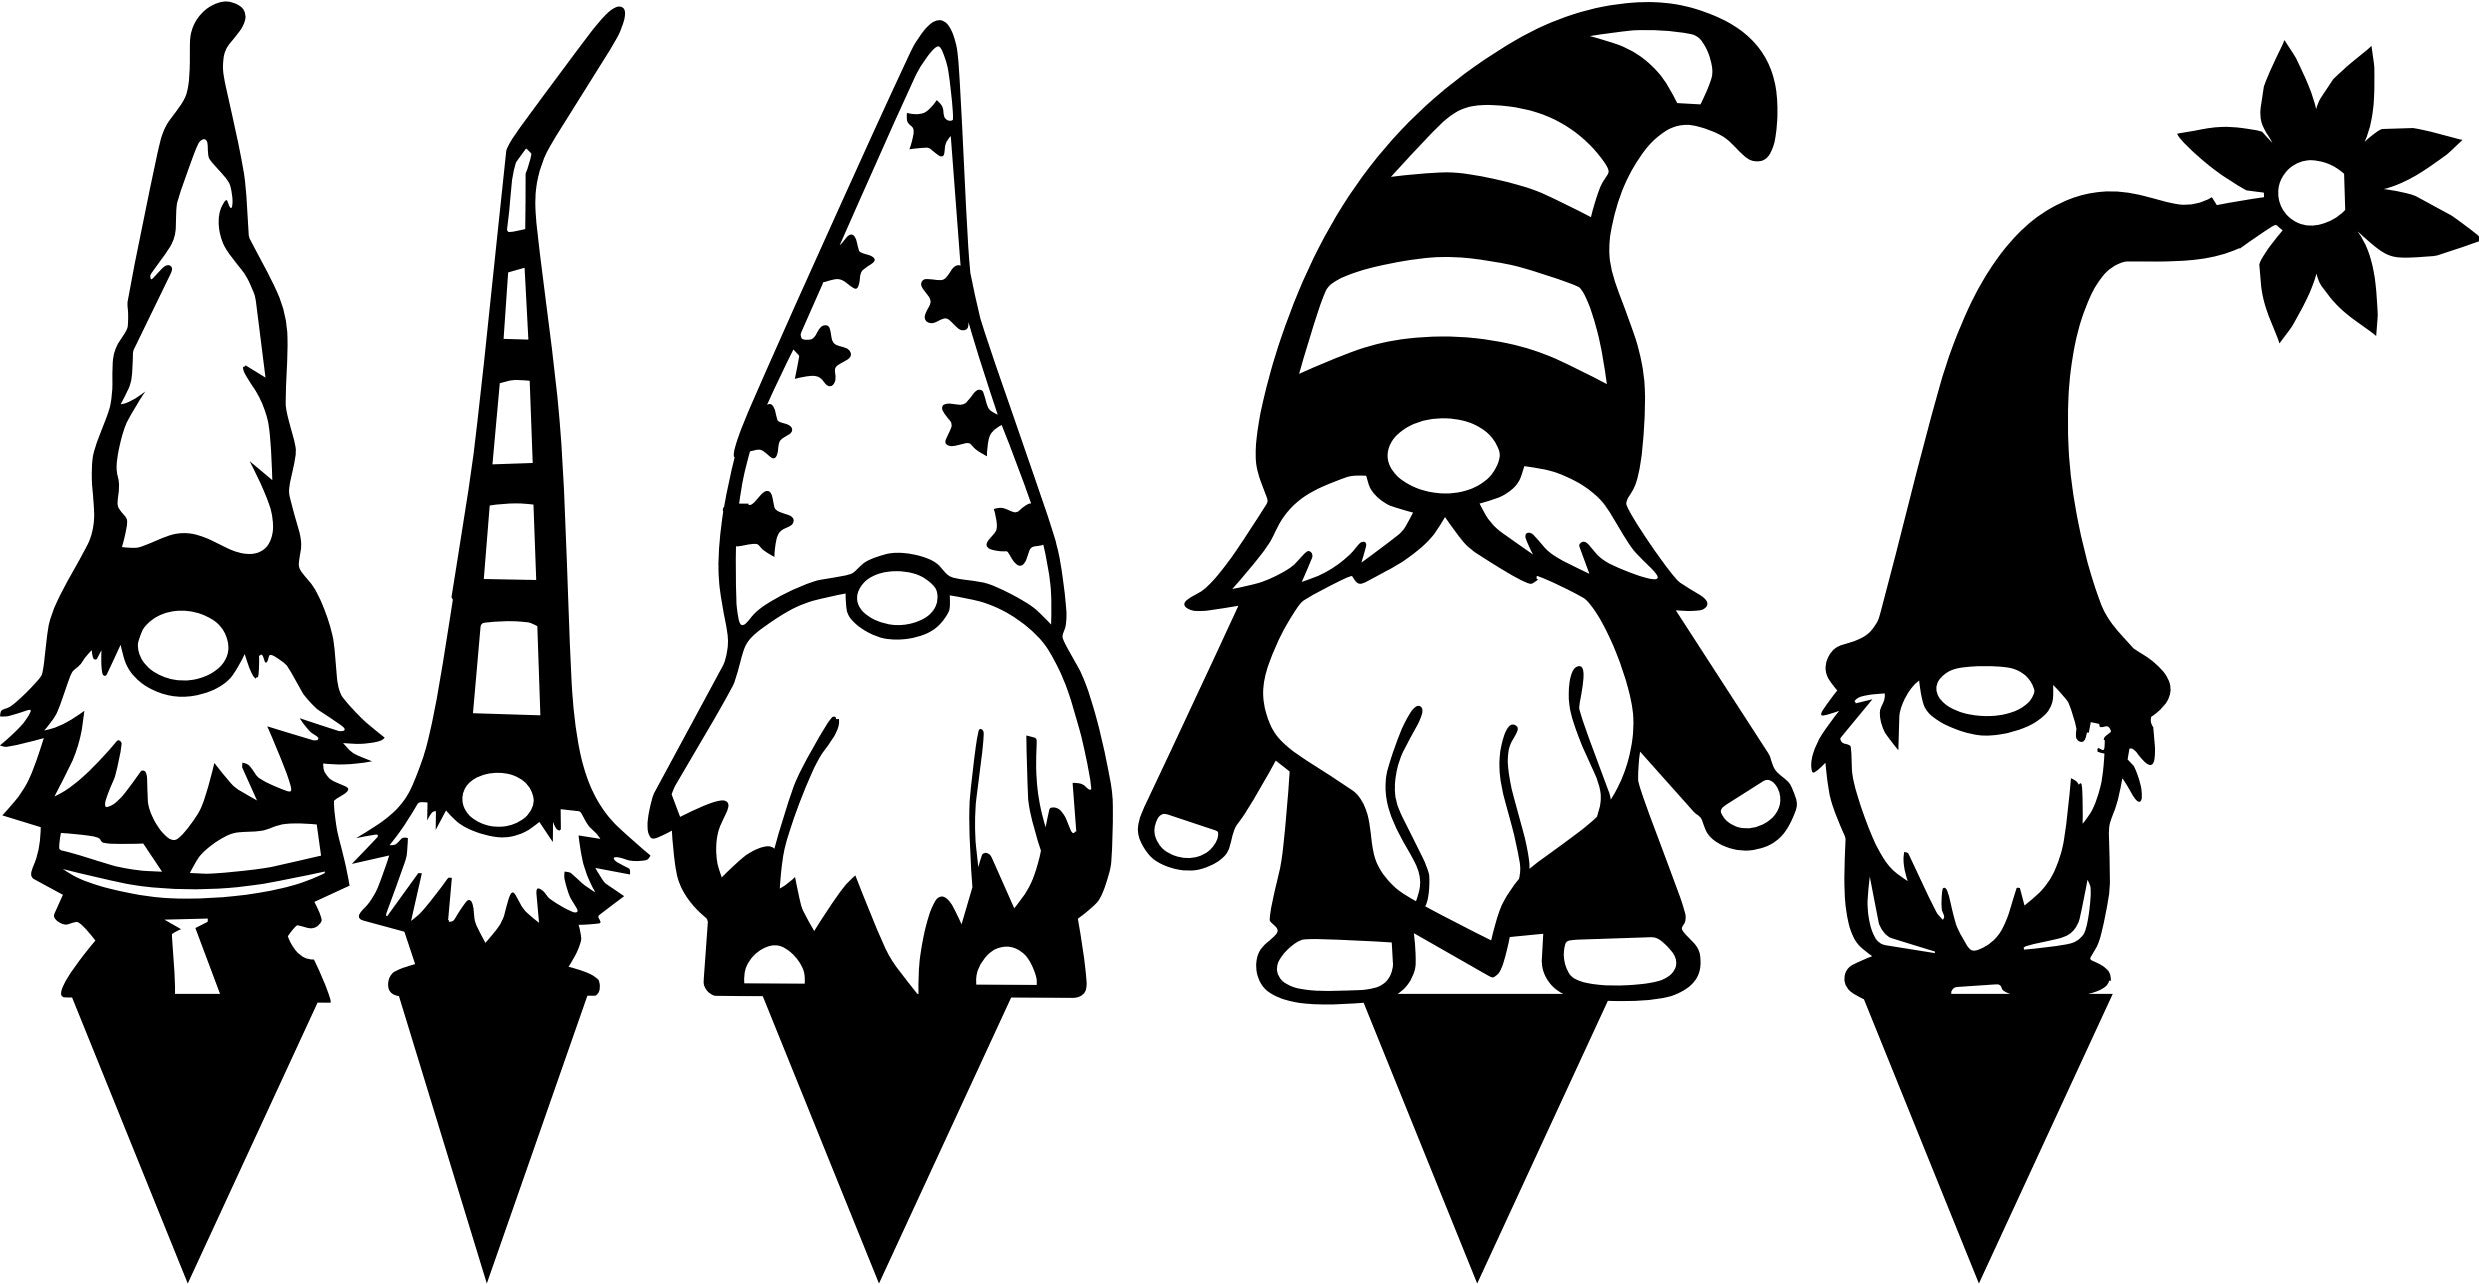 Garden Gnome Stakes - Bundle Pack (5)